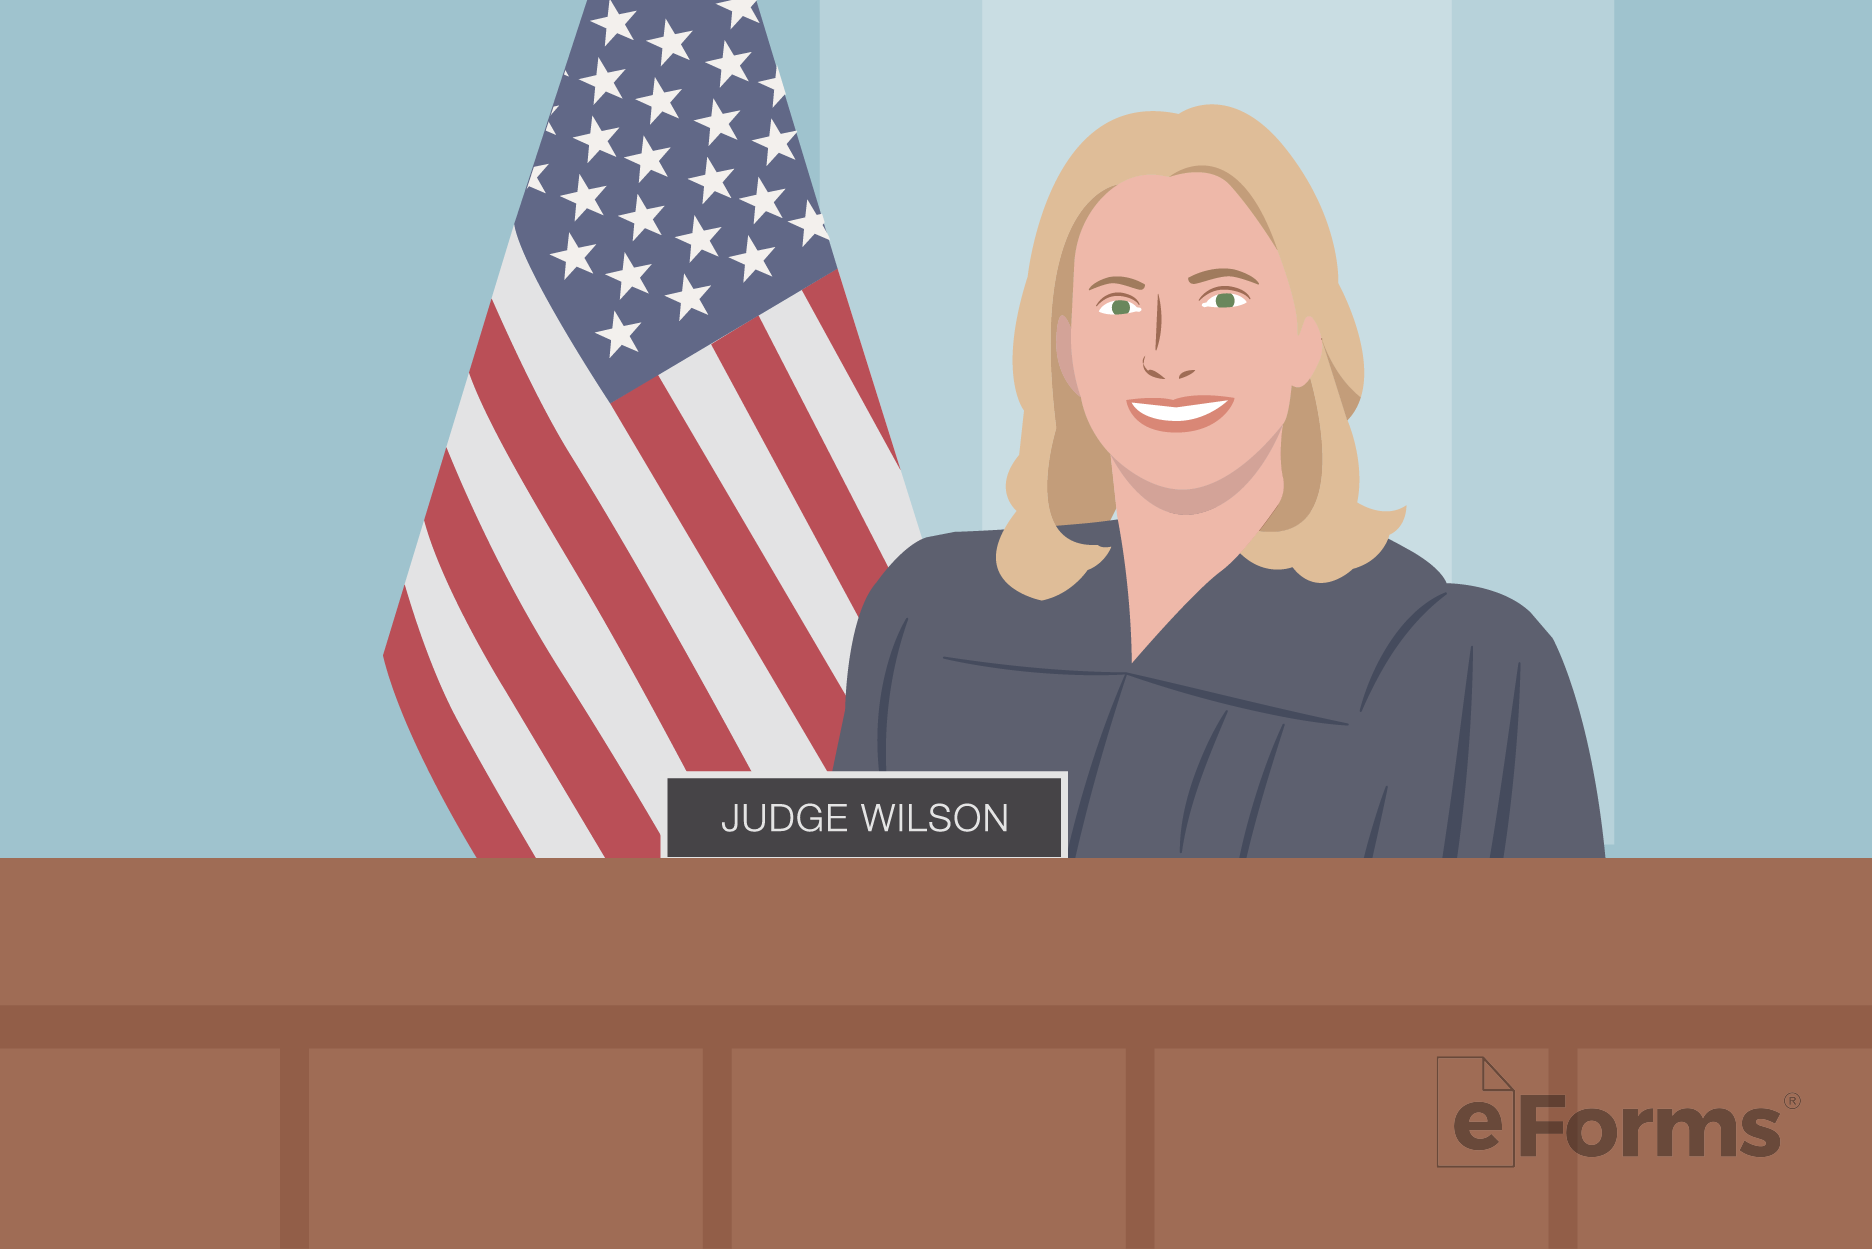 Female judge seated on bench with American flag behind.